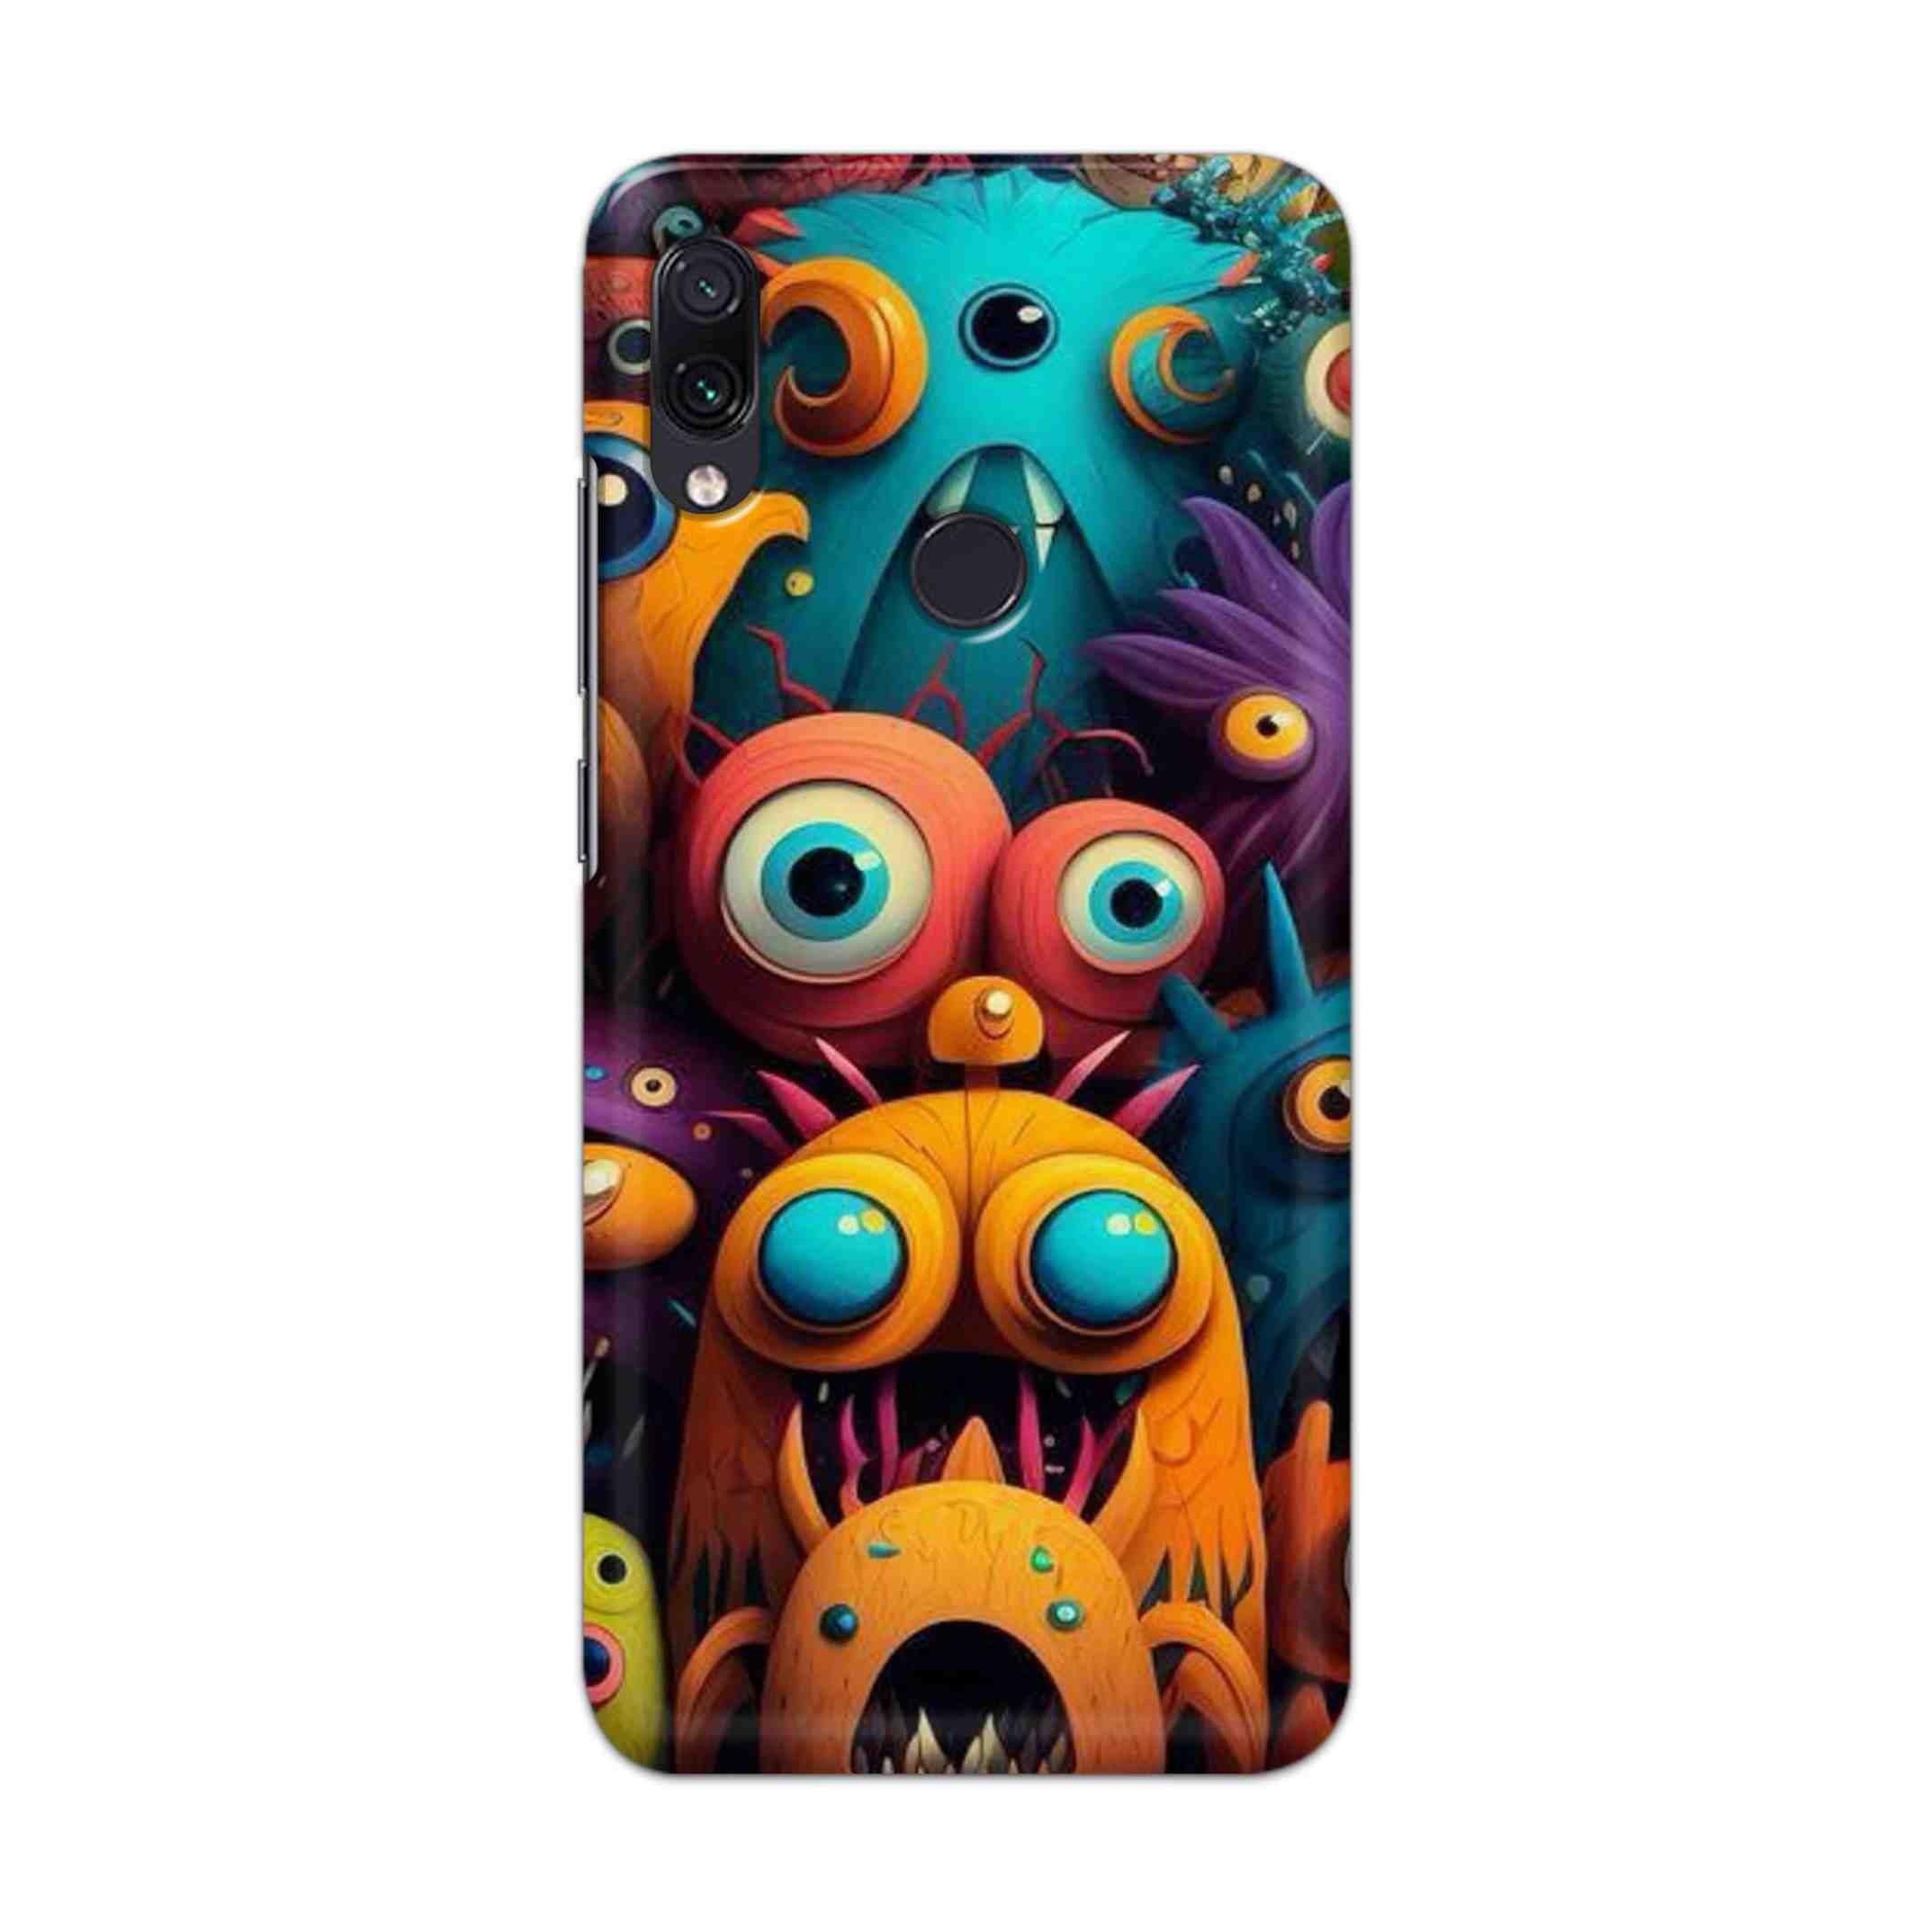 Buy Zombie Hard Back Mobile Phone Case Cover For Xiaomi Redmi 7 Online